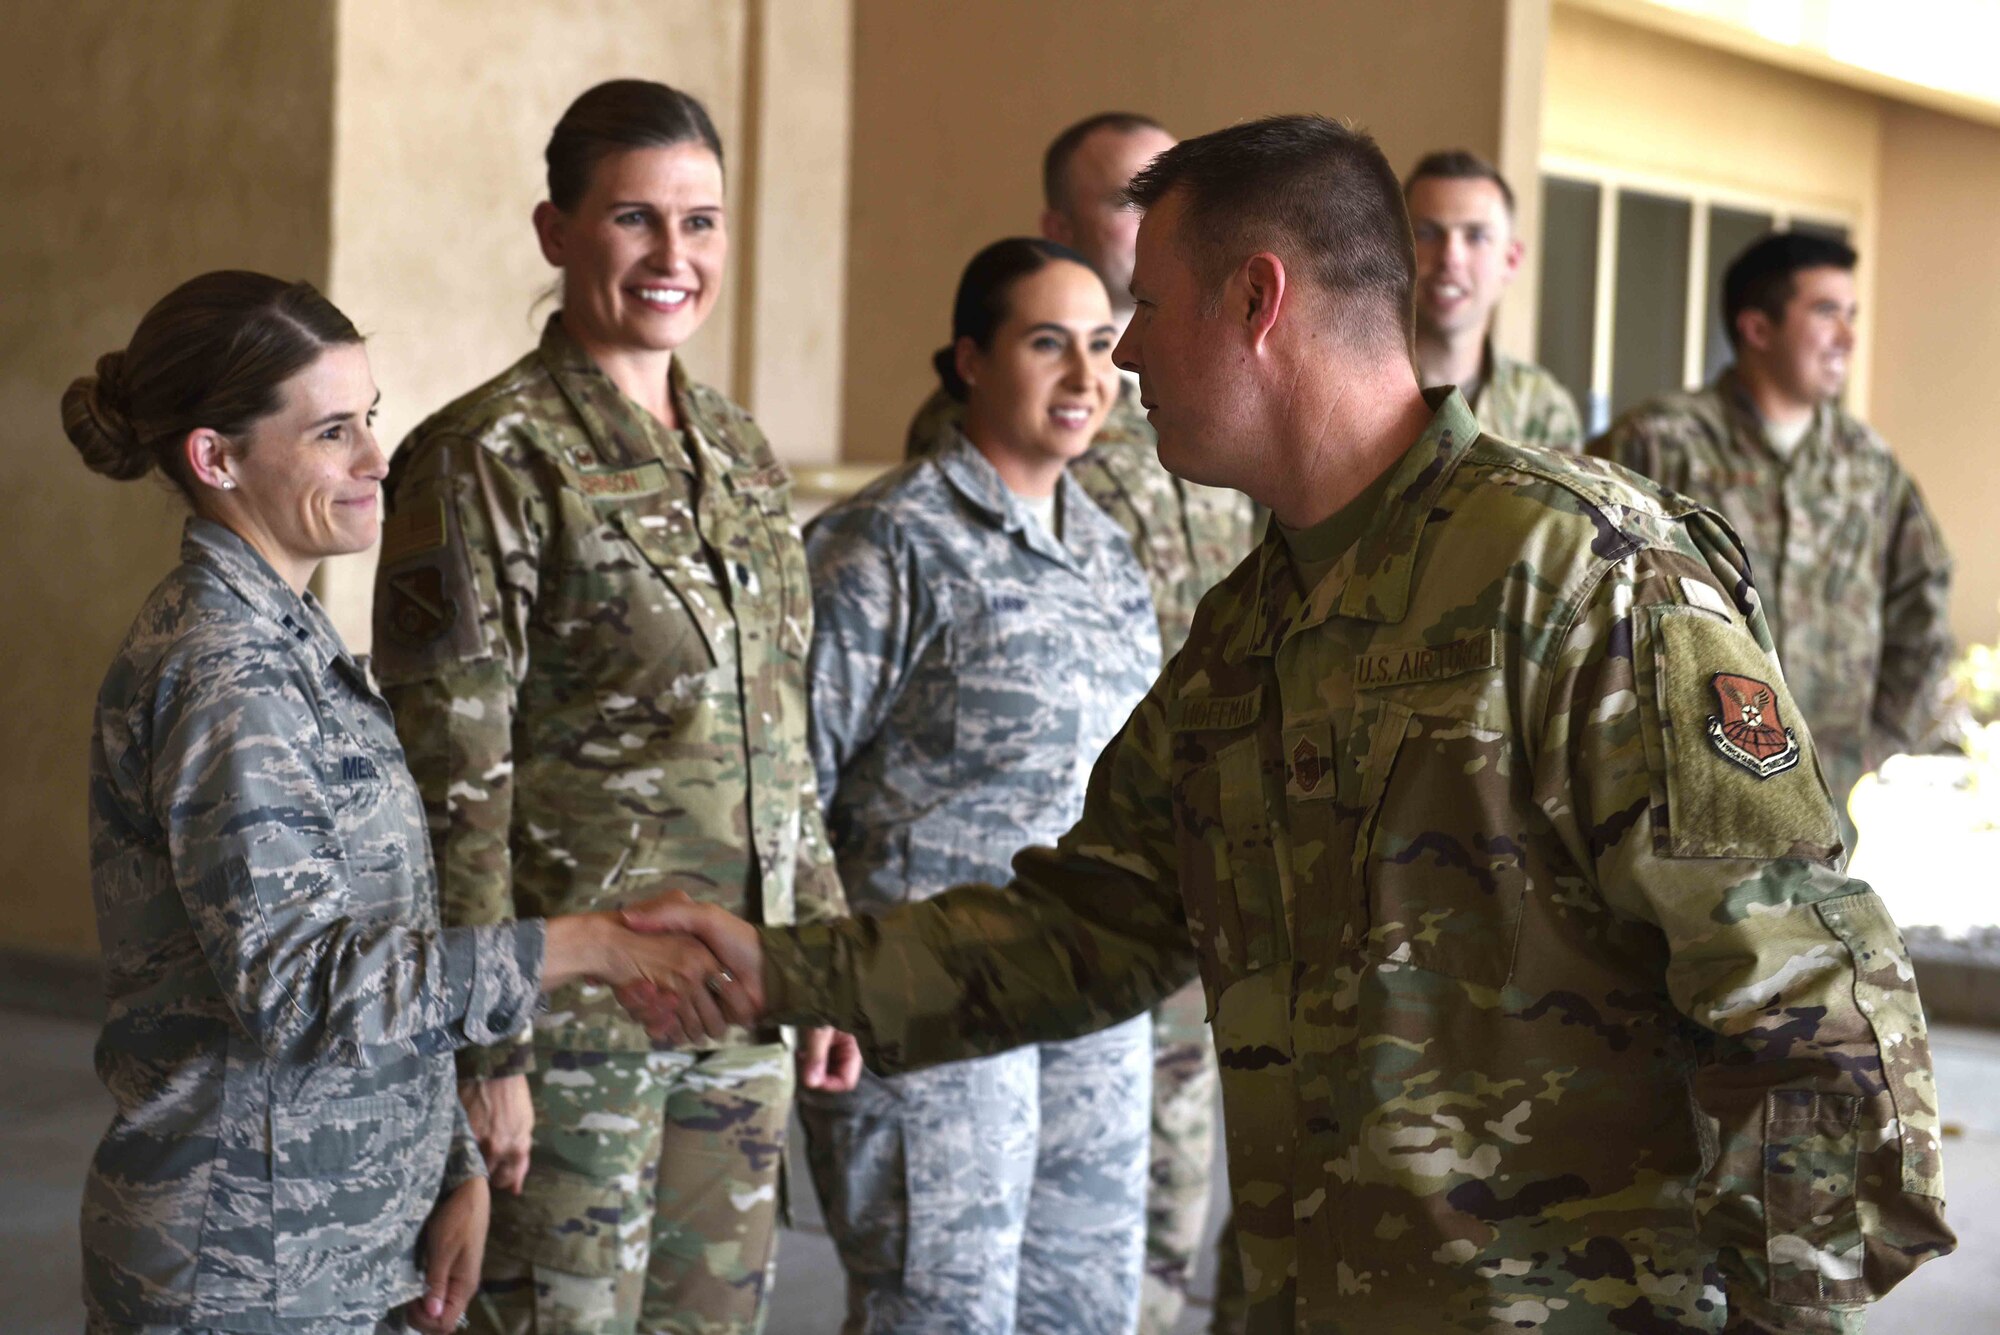 U.S. Air Force Chief Master Sgt. Charles Hoffman, Air Force Global Strike Command command chief, is welcomed by Capt. Malinda Meuse, flight commander, 377th Aerospace Medical Squadron war fighter clinic at Kirtland Air Force Base, N.M., June 13, 2019. Hoffman visited with Airmen across the 377th Air Base Wing to learn more about them and their mission. (U.S. Air Force photo by Airman 1st Class Austin J. Prisbrey)